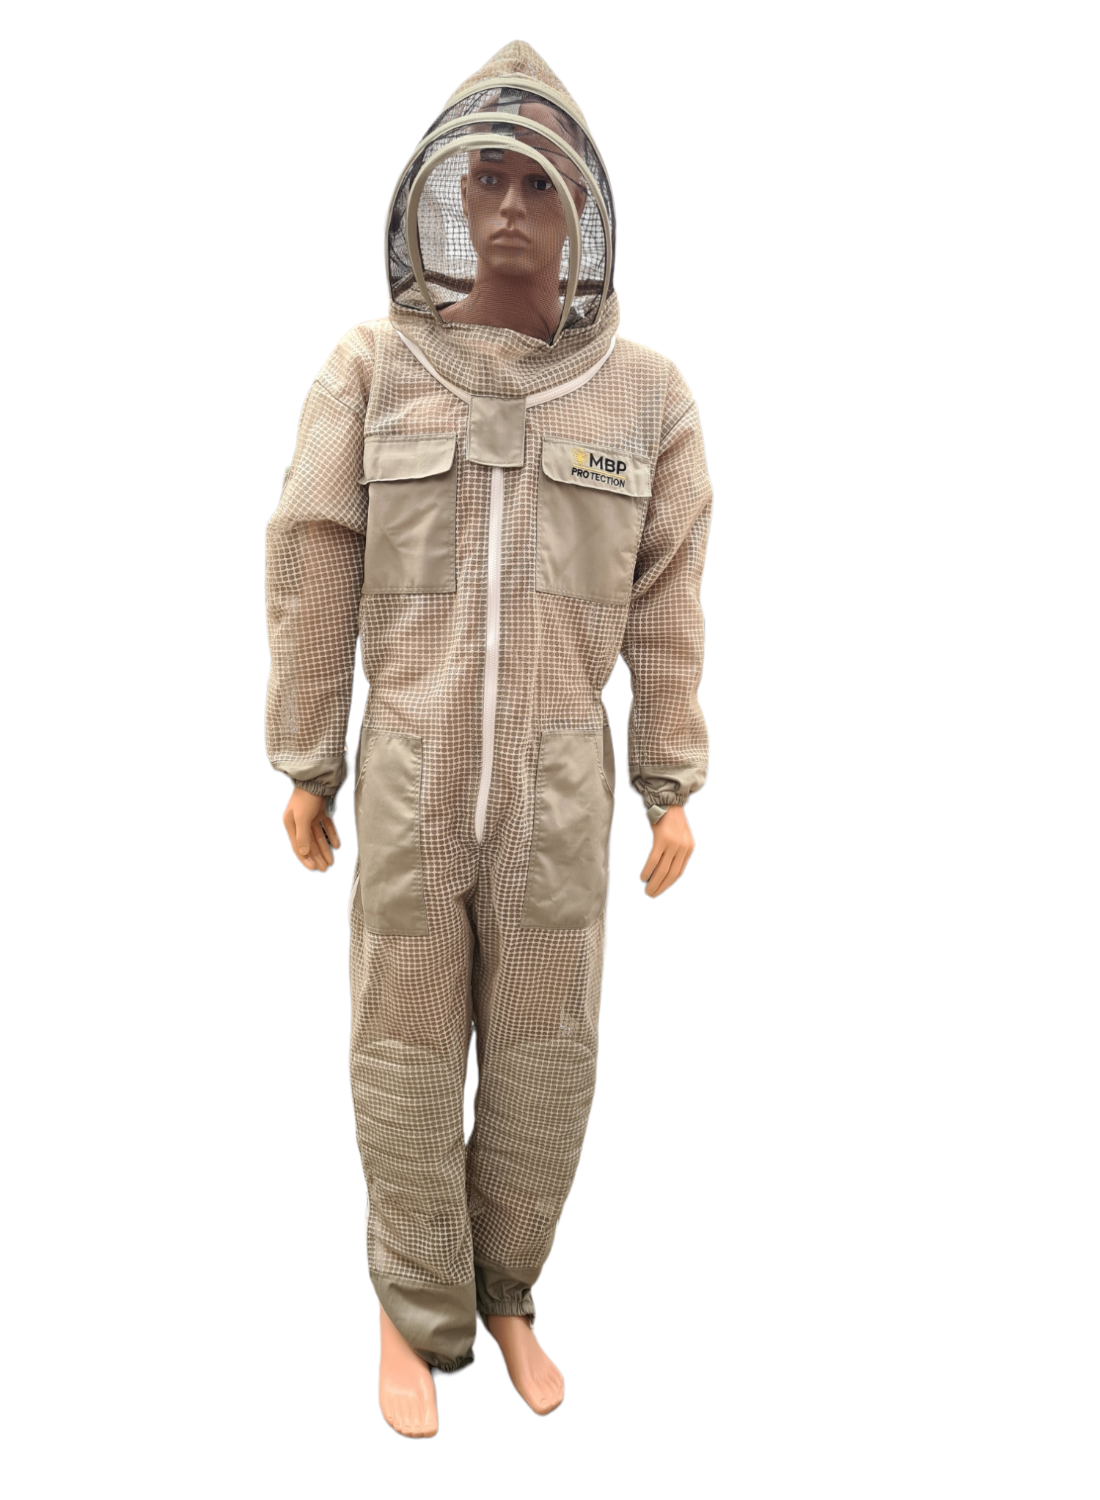 MBP Khaki Protection 3 Layer Bee Suit -